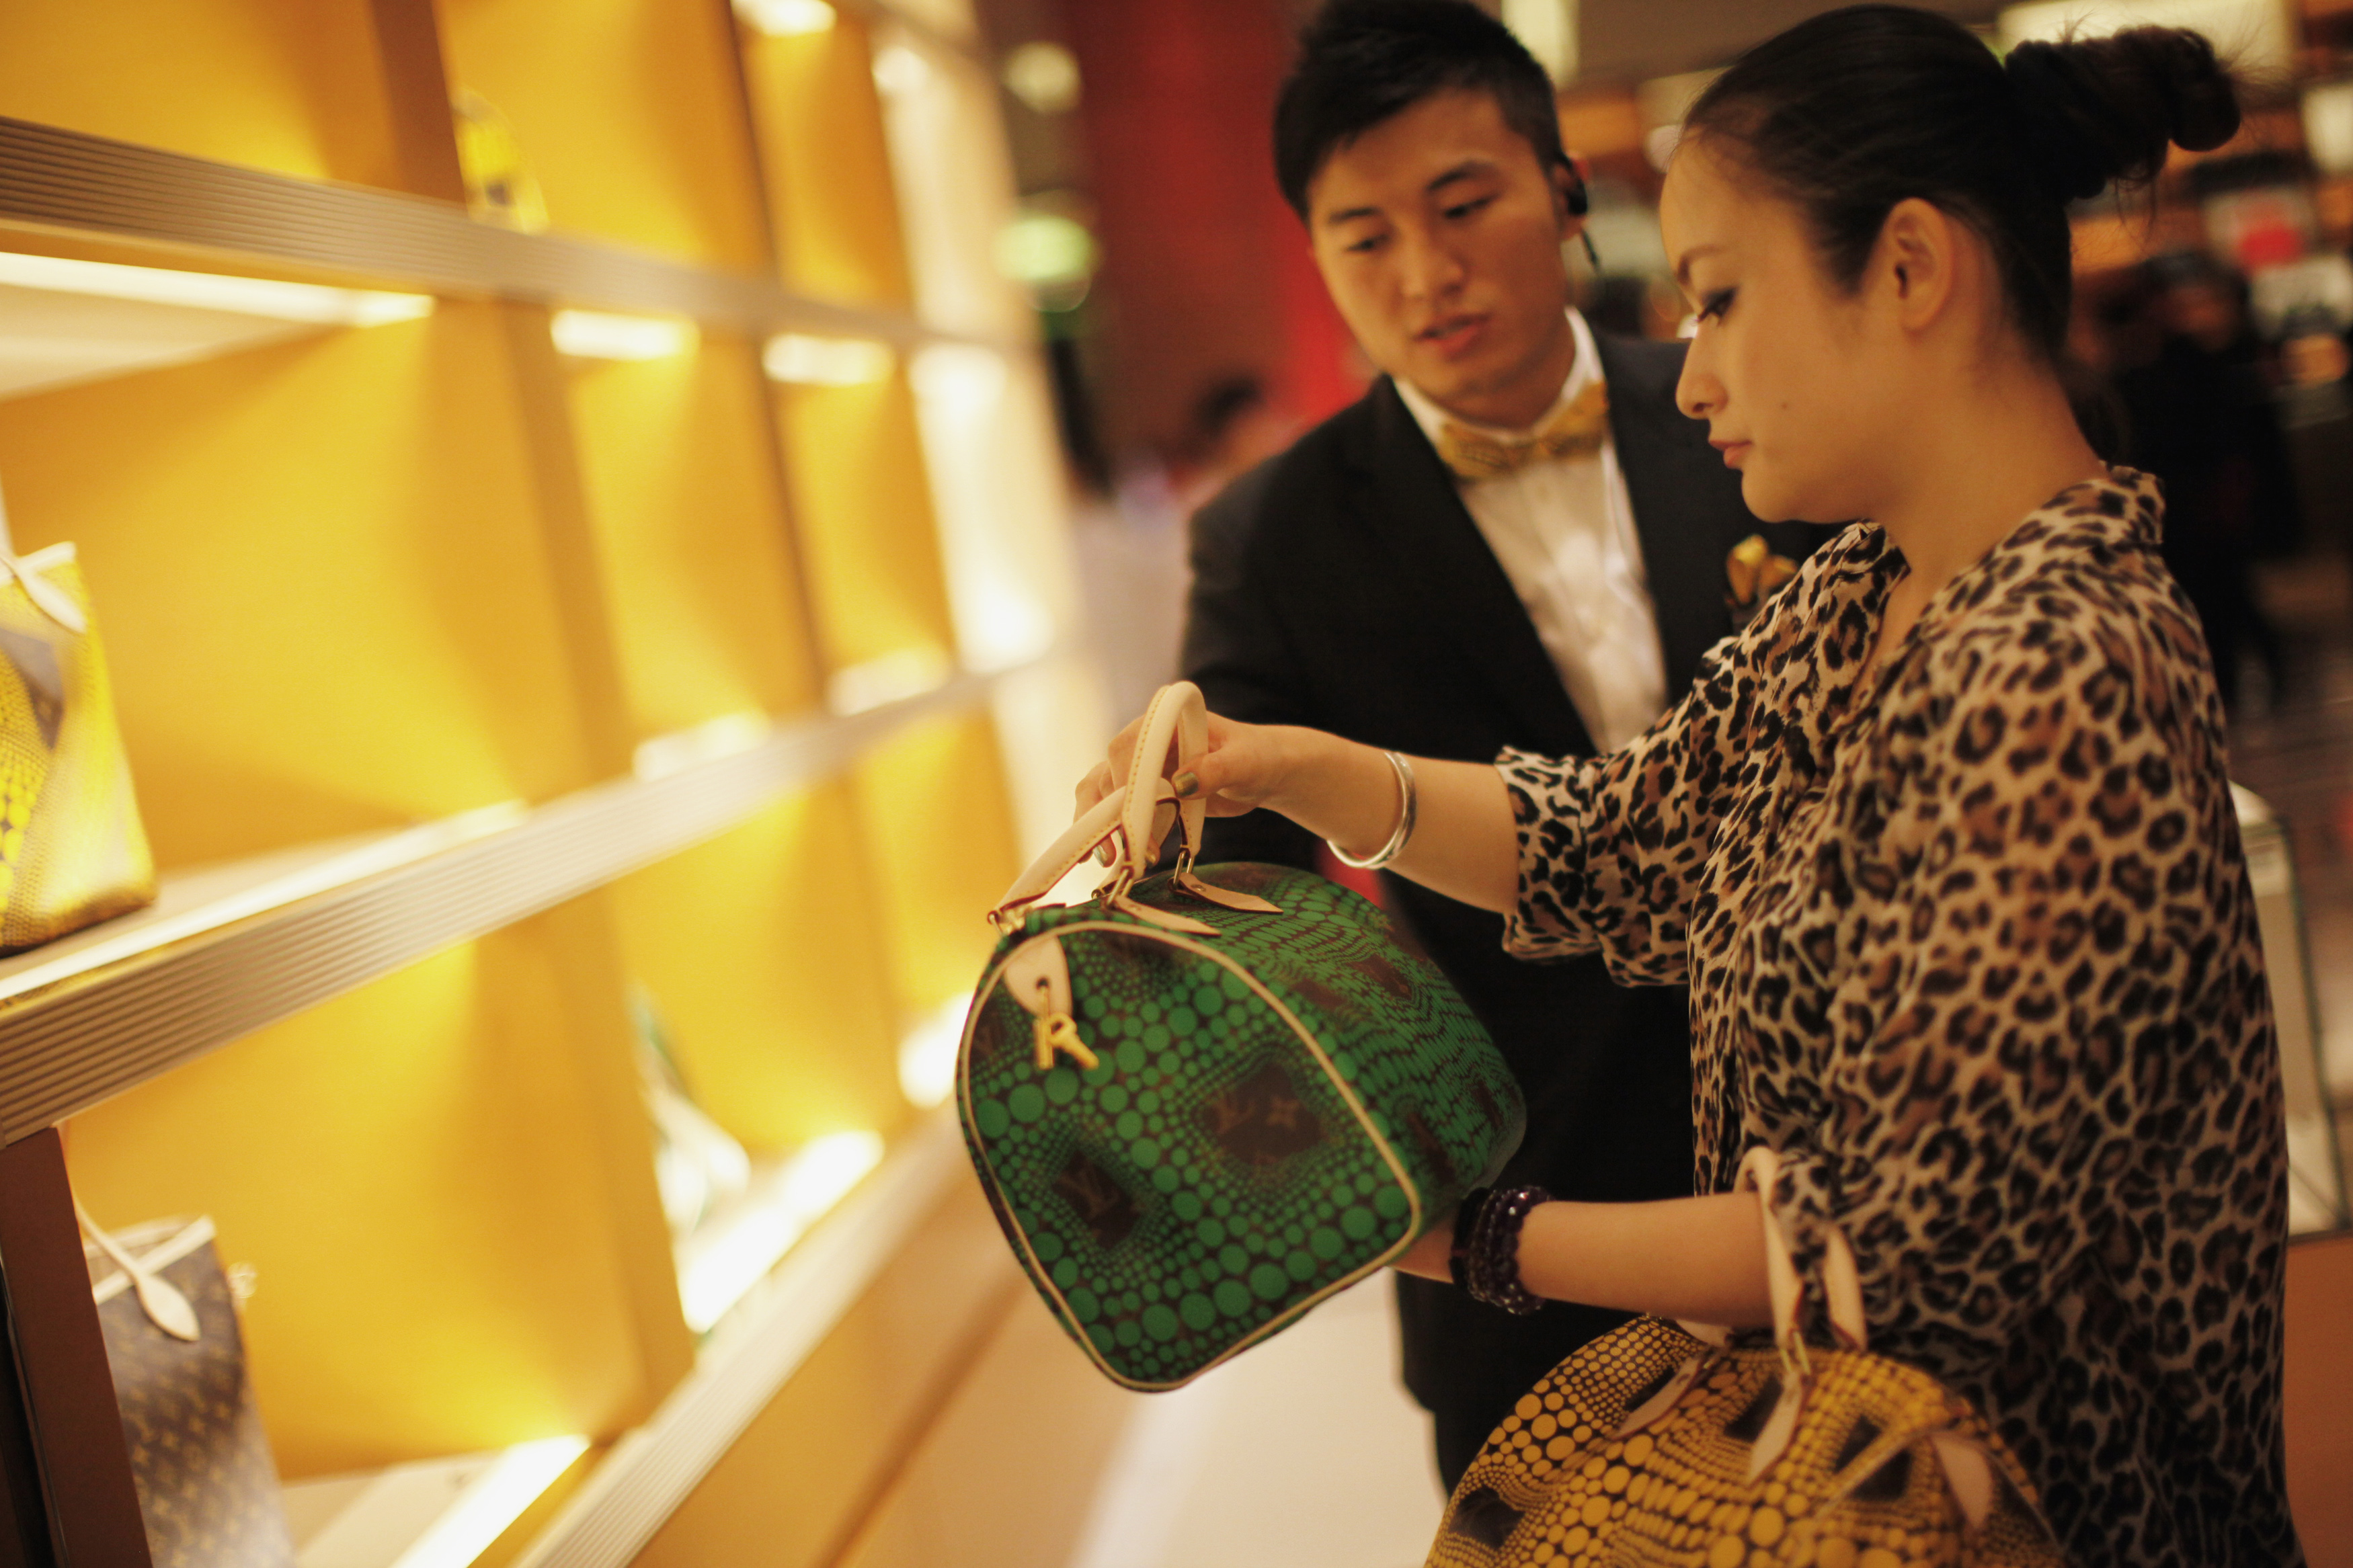 China's middle-class push has luxury silver lining